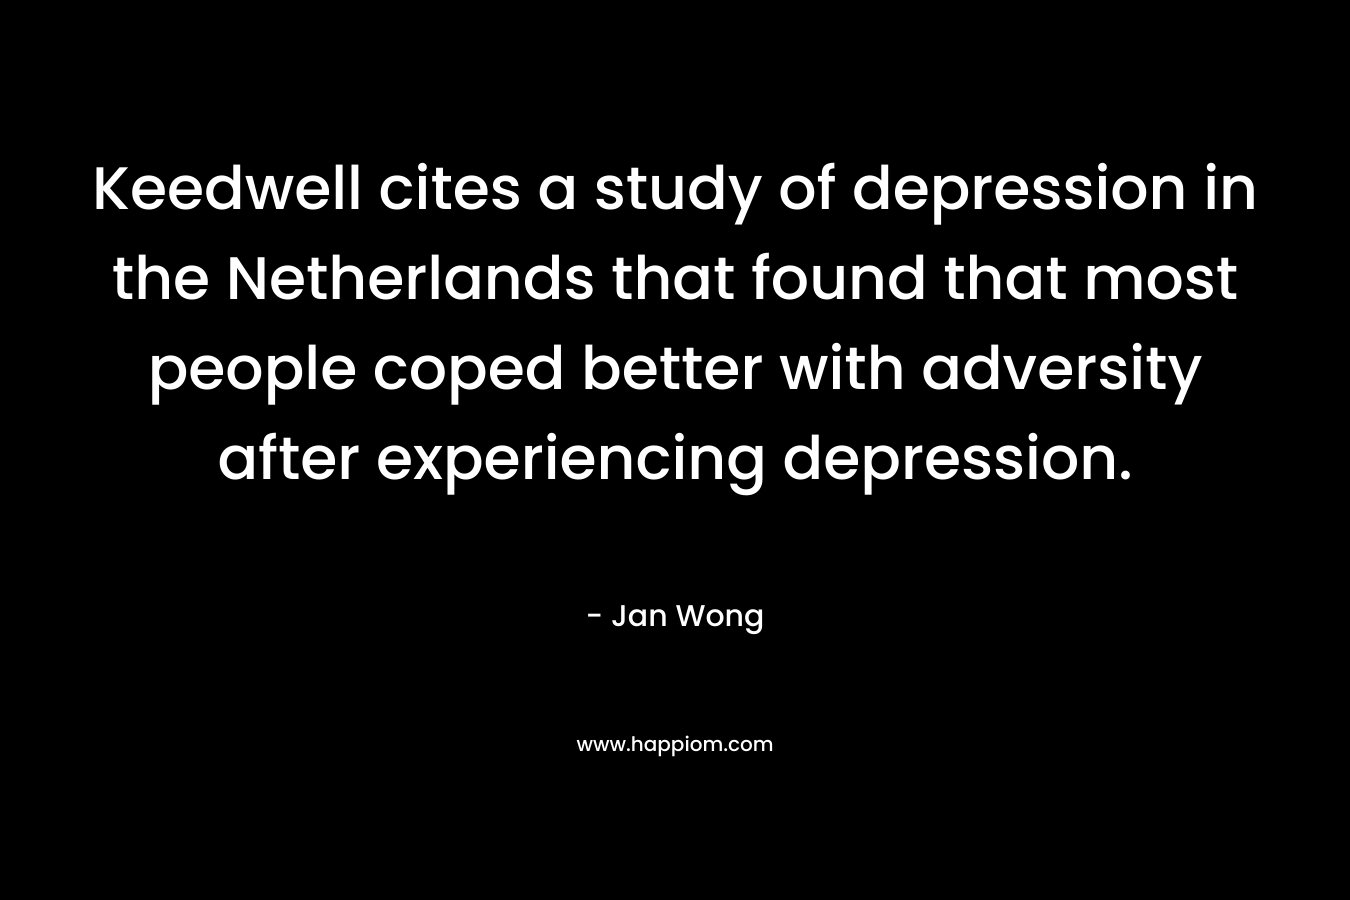 Keedwell cites a study of depression in the Netherlands that found that most people coped better with adversity after experiencing depression.